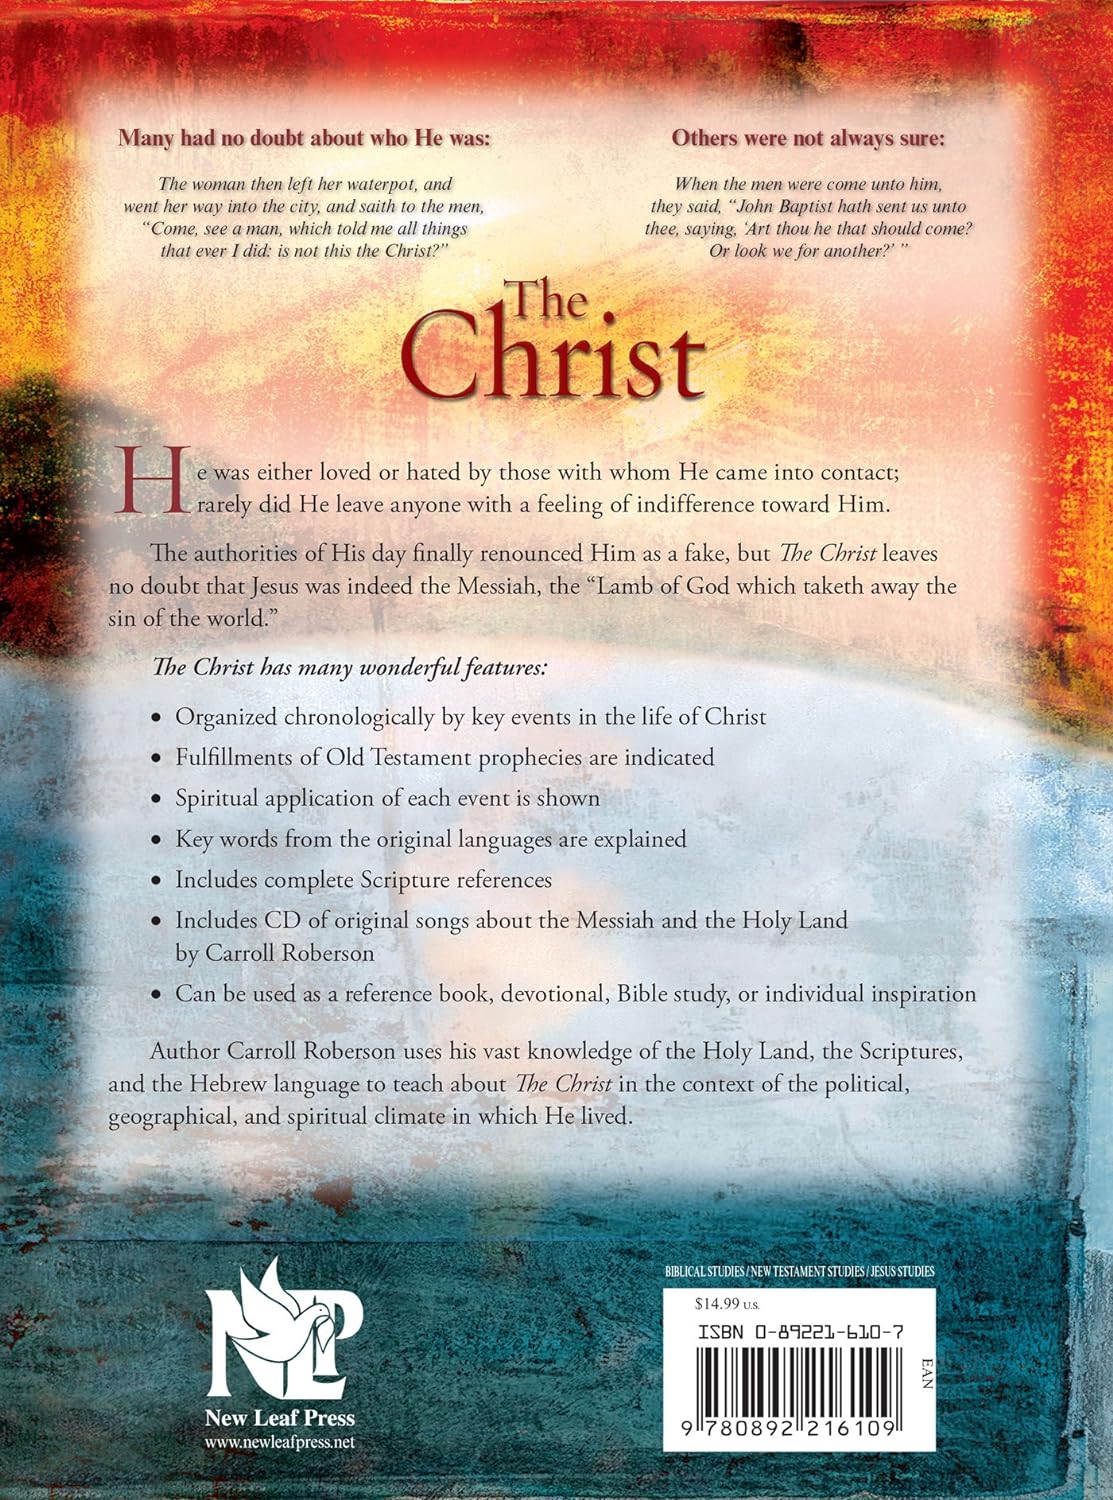 The Christ: A Closer Look at the Events in the Life of Christ